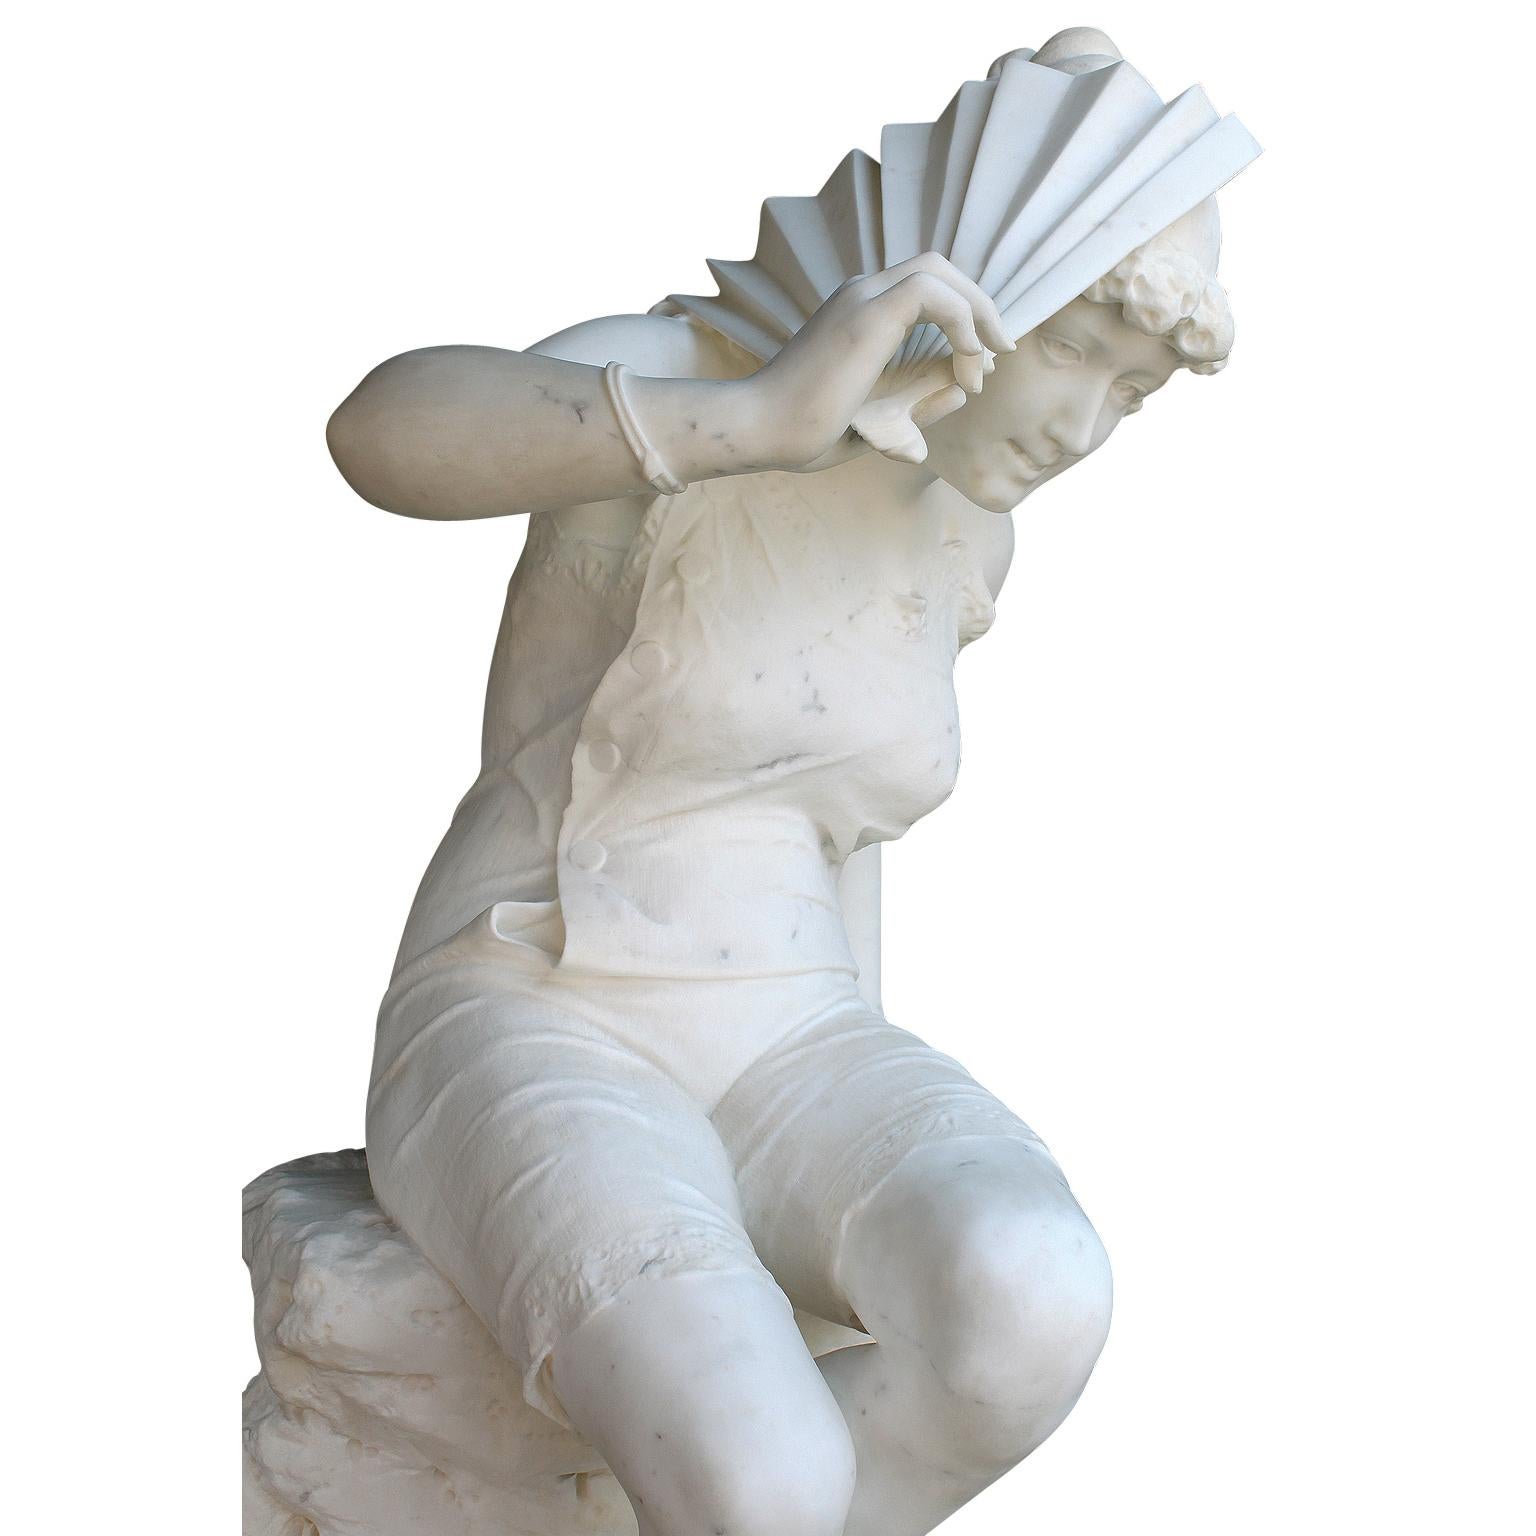 Italian Late 19th Century Belle Epoque Carved Marble Figure of a Bather Girl For Sale 5